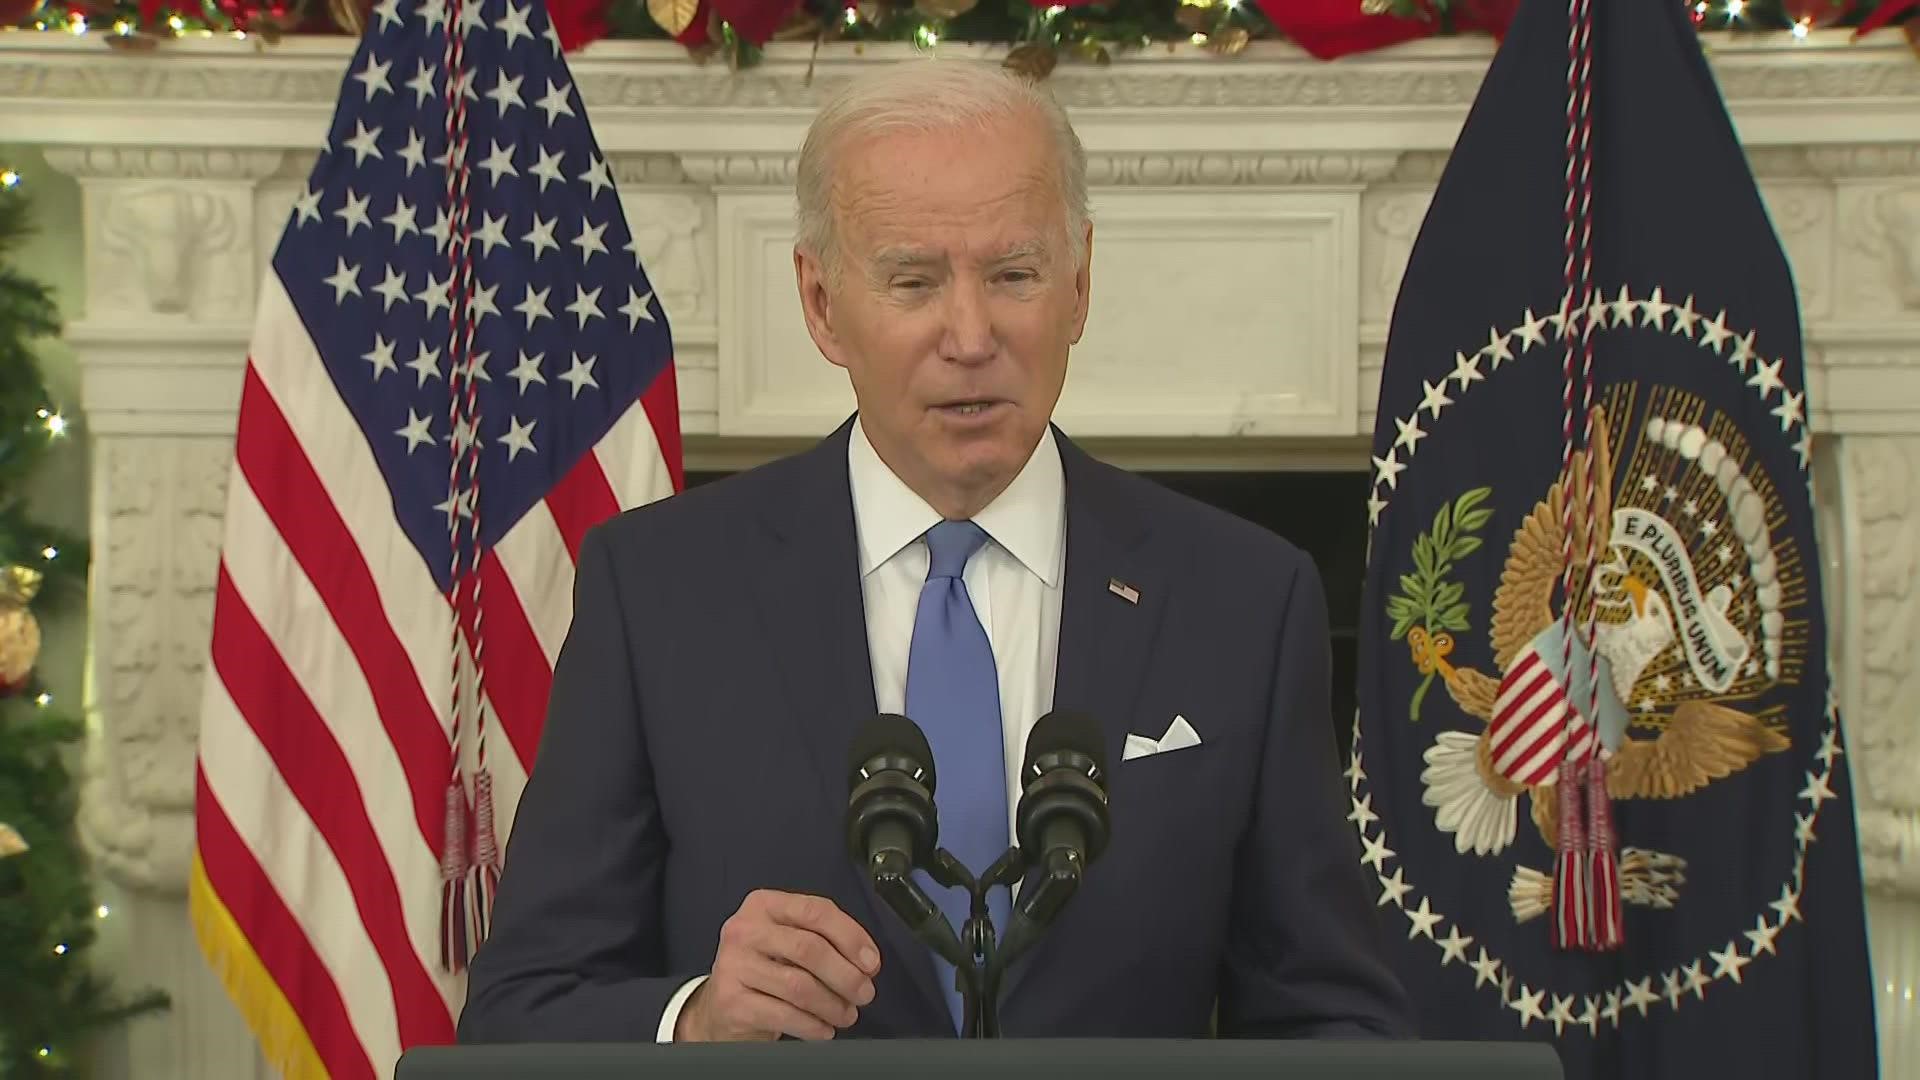 Biden also said FEMA will construct emergency structures and deploy ambulances to move patients from overcrowded hospitals.